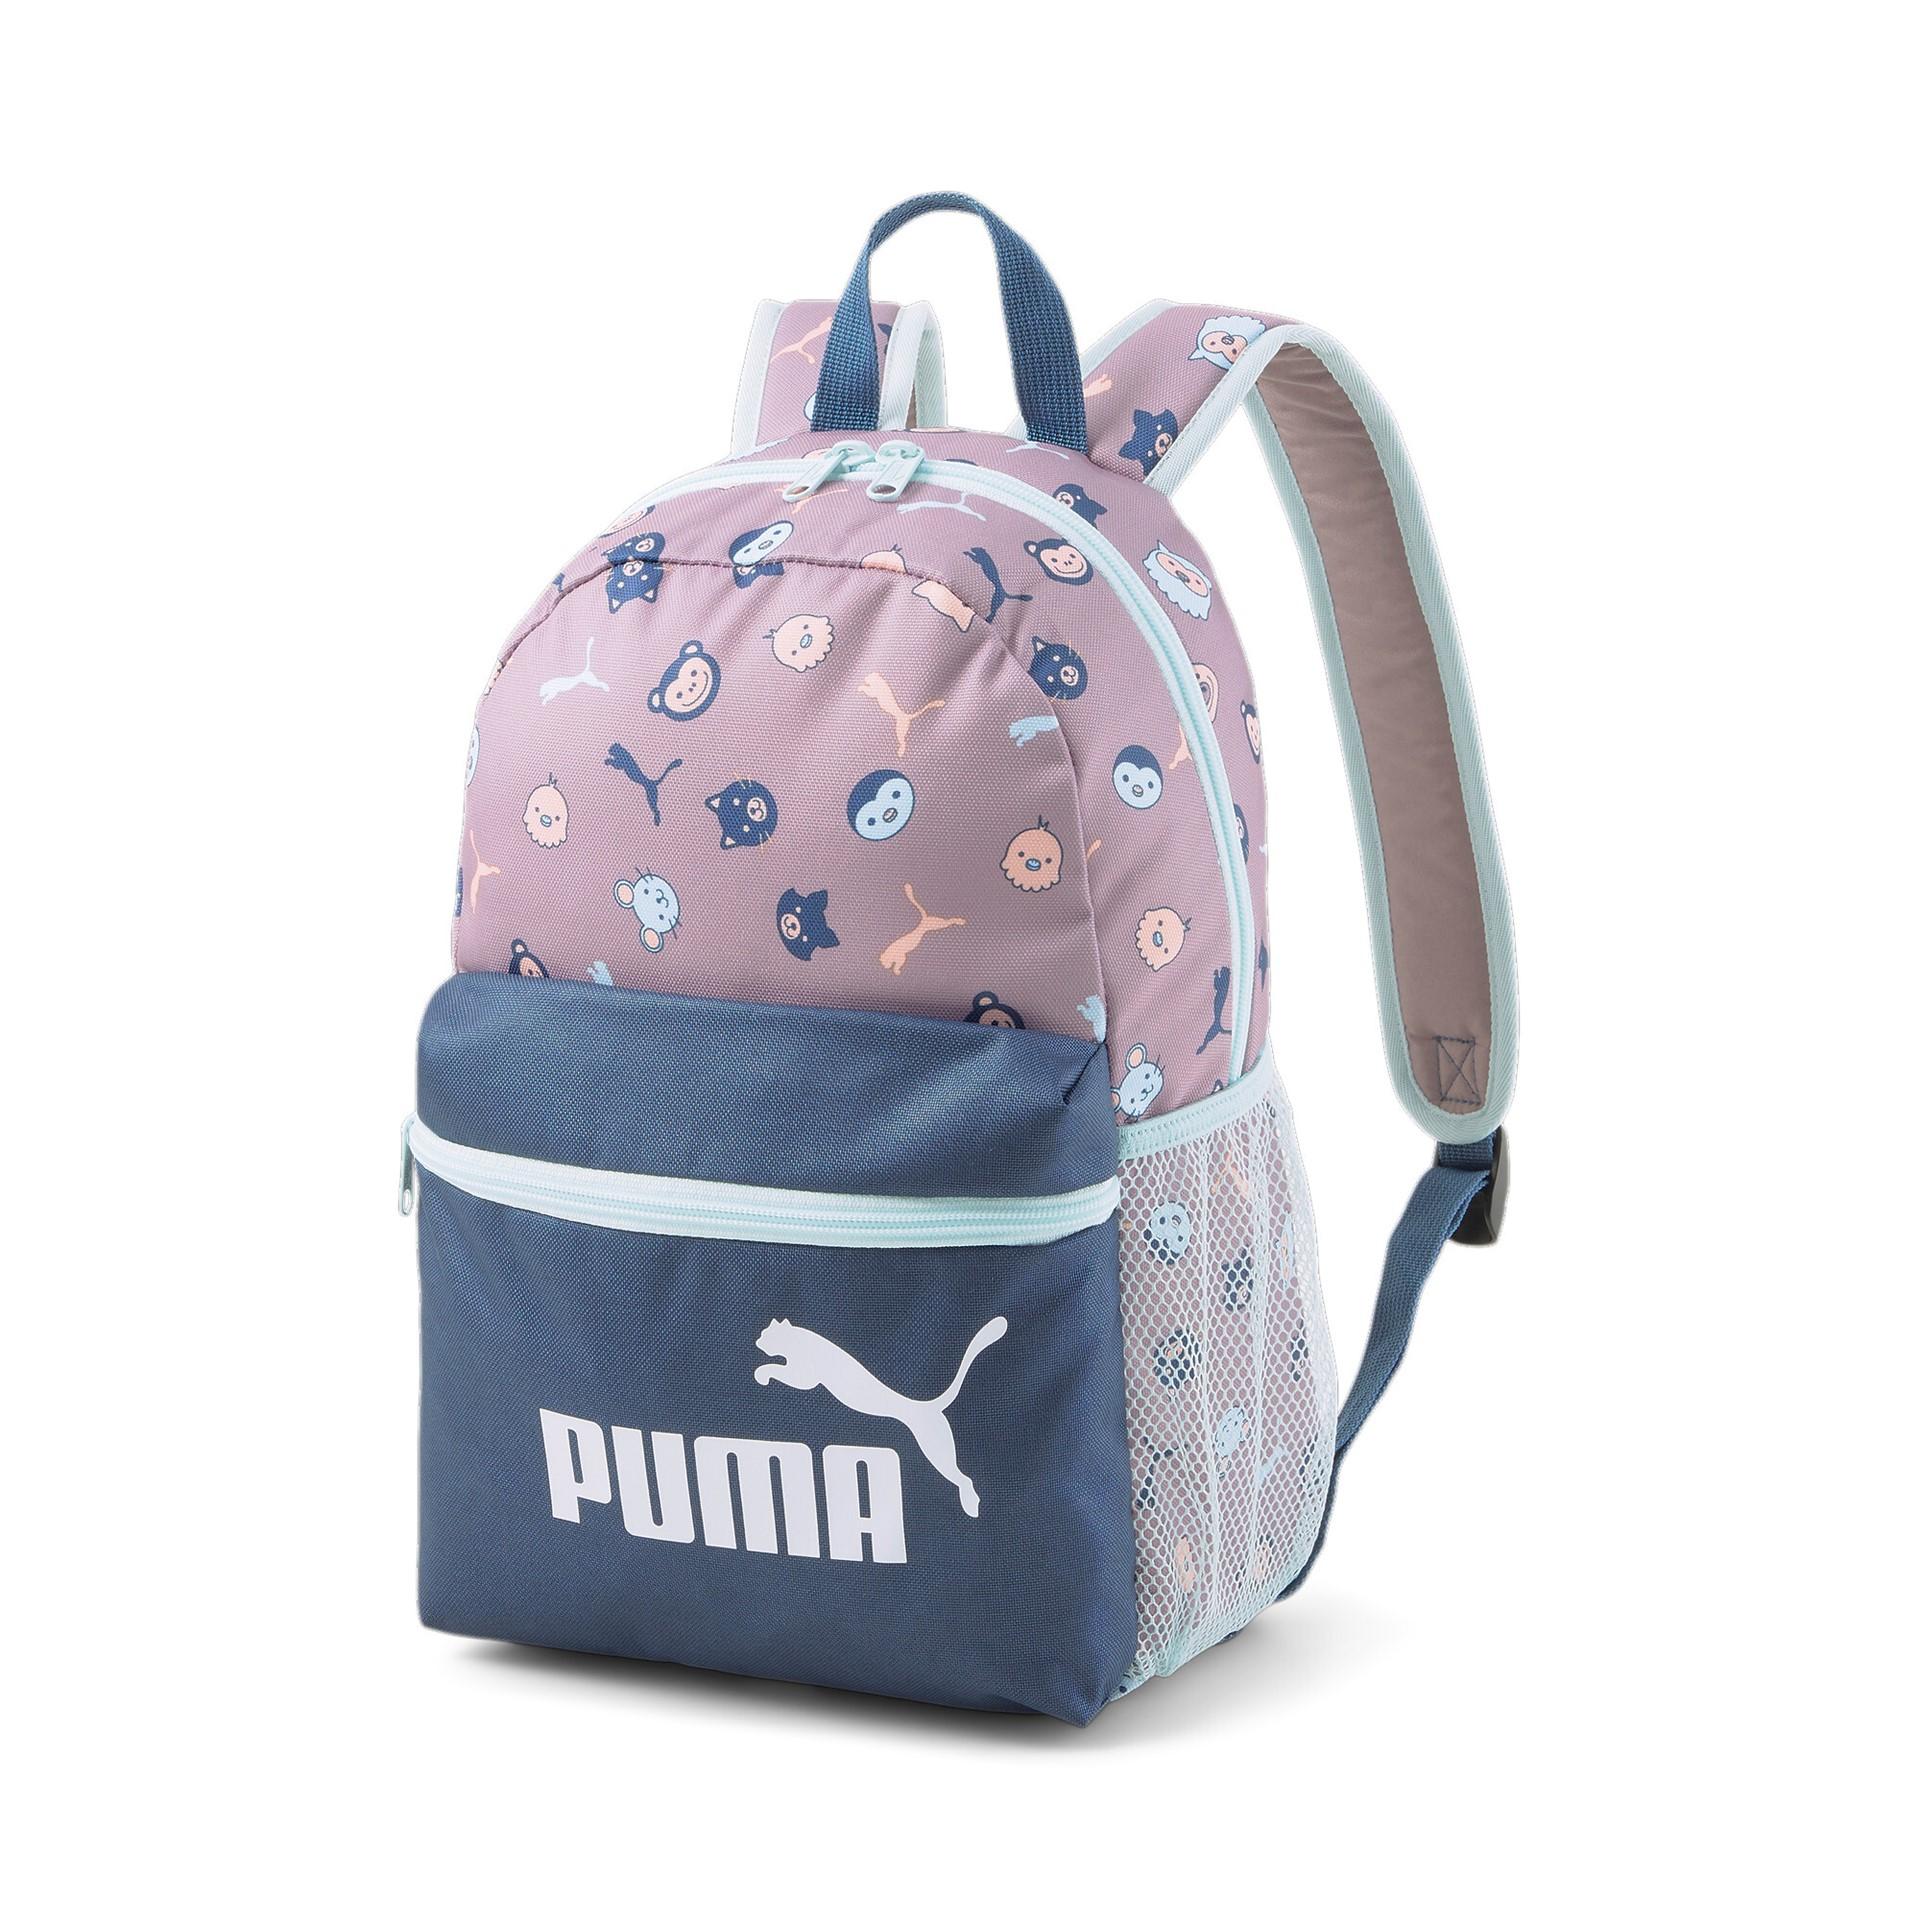 Puma Phase Small Backpack